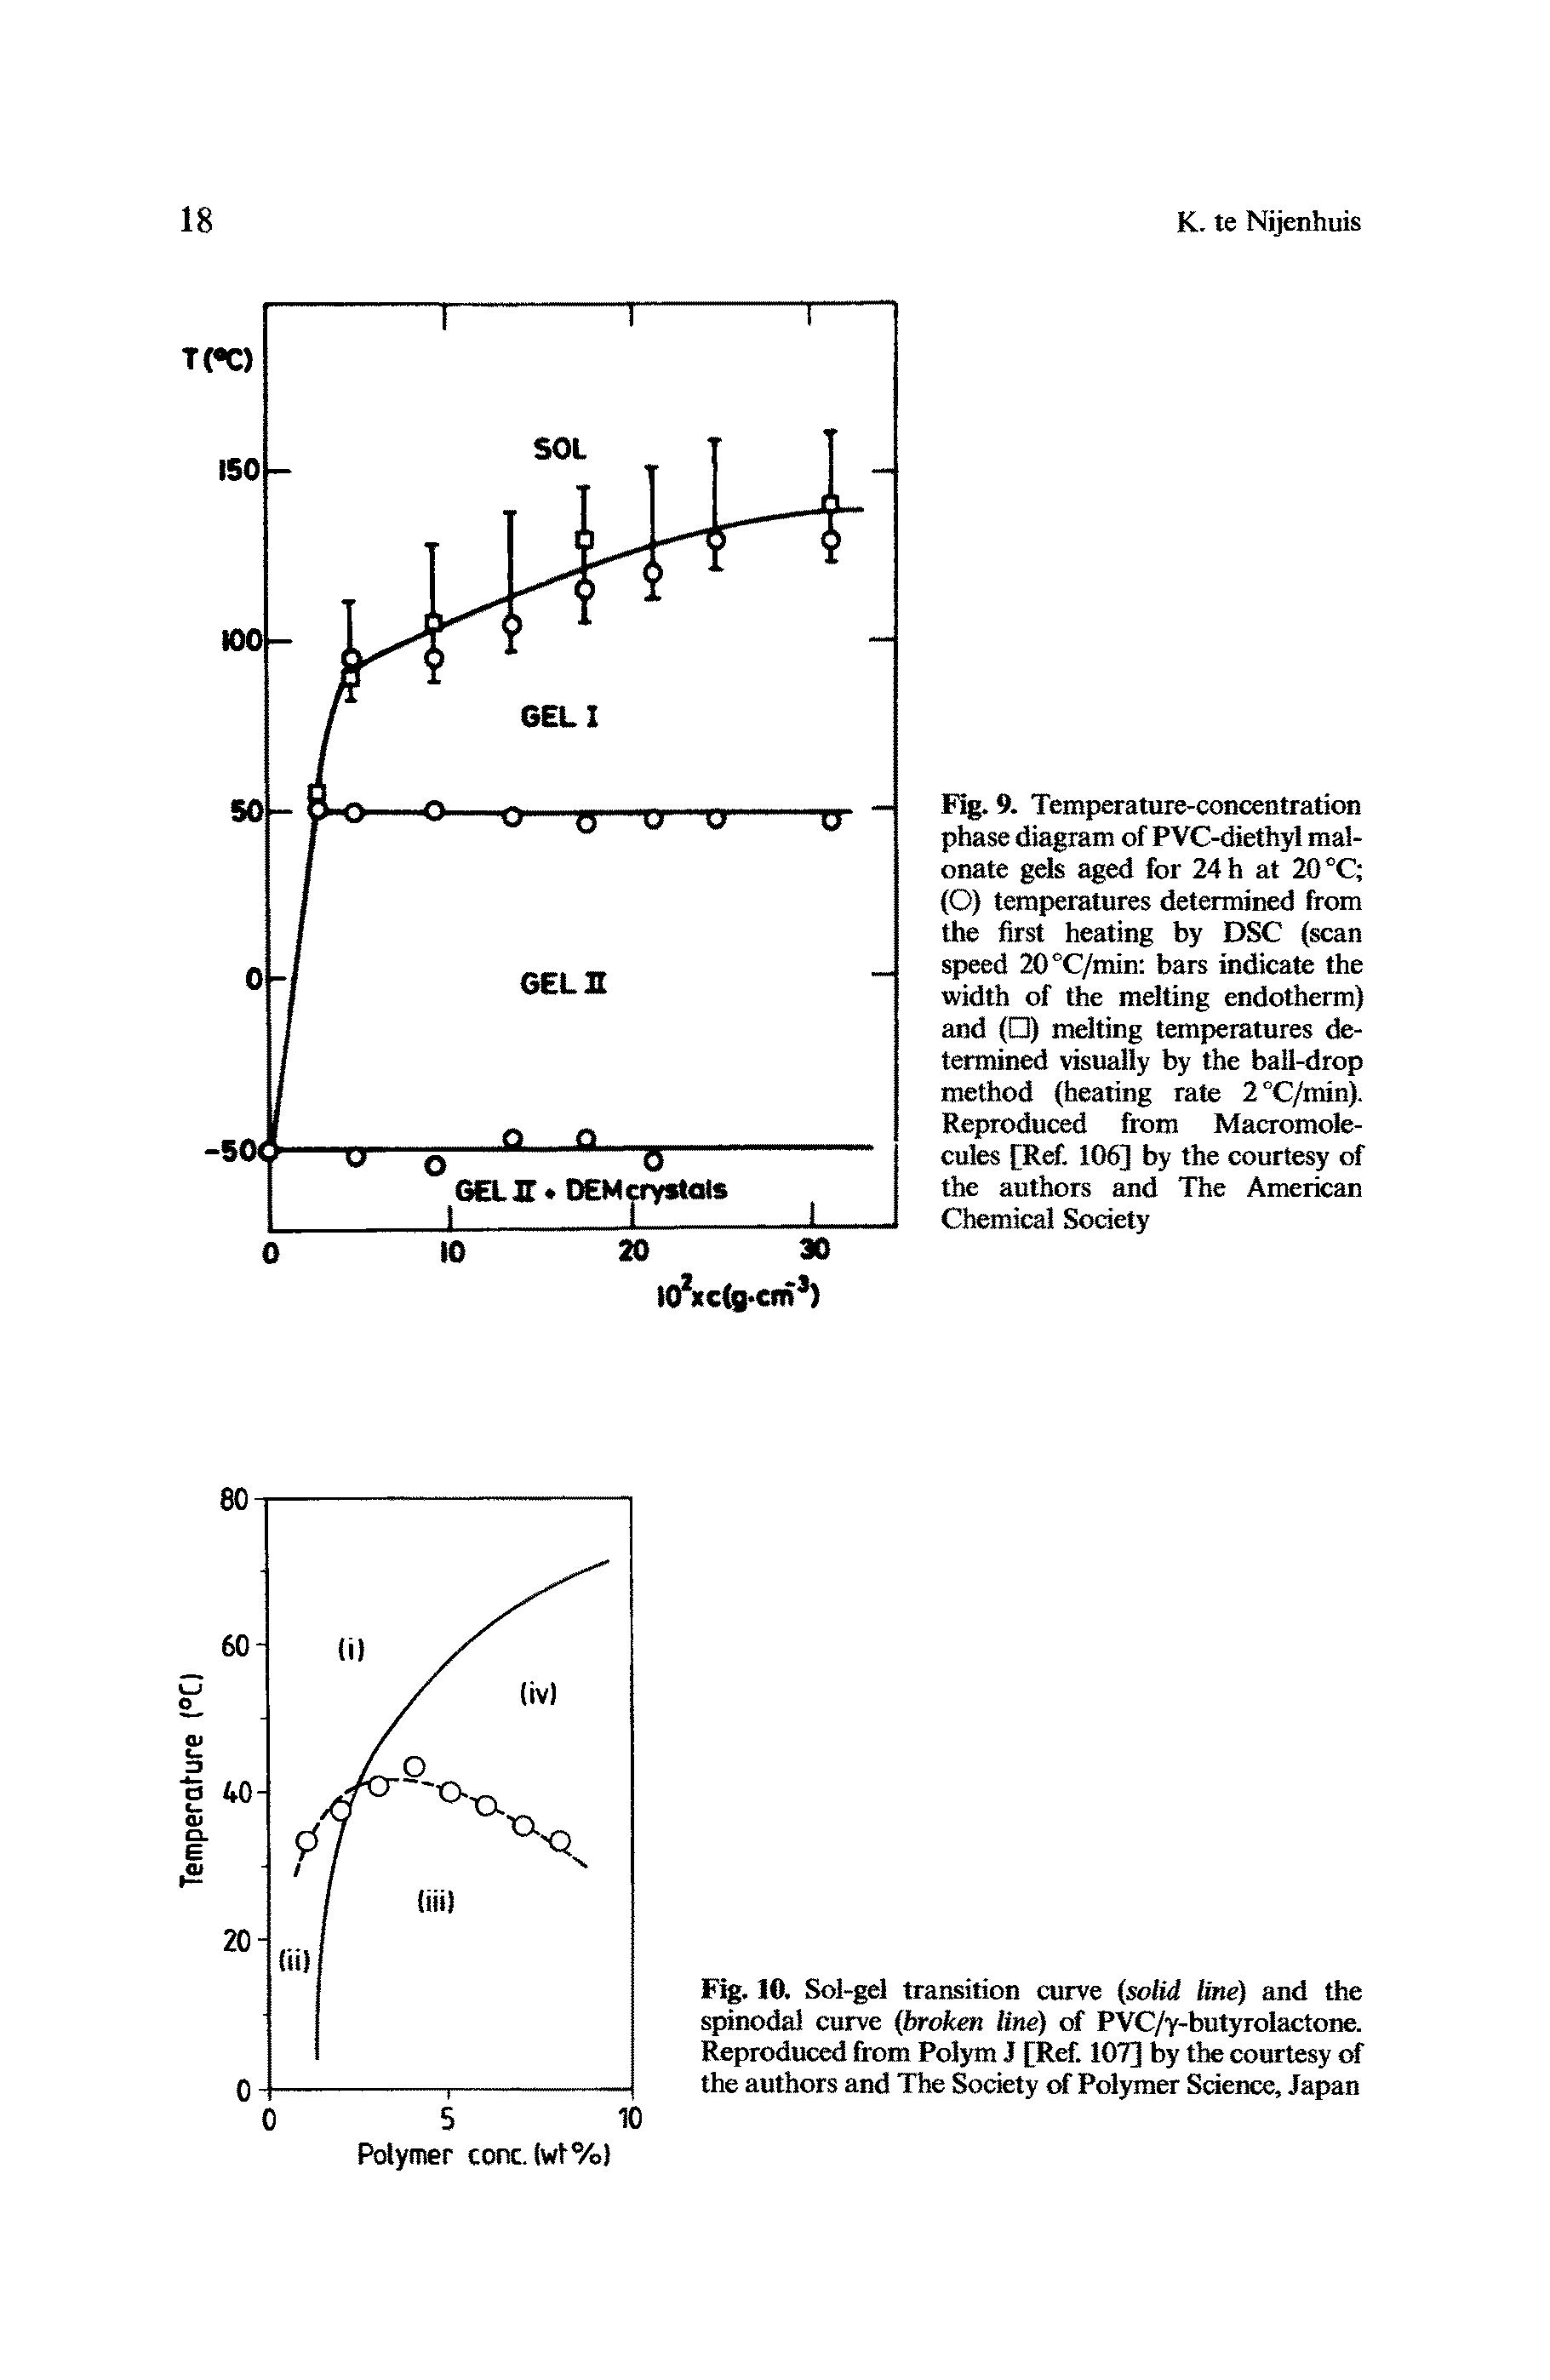 Fig. 9. Temperature-concentration phase diagram of PVC-diethyl ma -onate gels aged for 24 h at 20 °C (O) temperatures determined from the first heating by DSC (scan speed 20°C/min bars indicate the width of the melting endotherm) and ( ) melting temperatures determined visually by the ball-drop method (heating rate 2°C/min). Eeproduced from Macromolecules [Ref. 106] by the courtesy of the authors and The American Chemical Society...